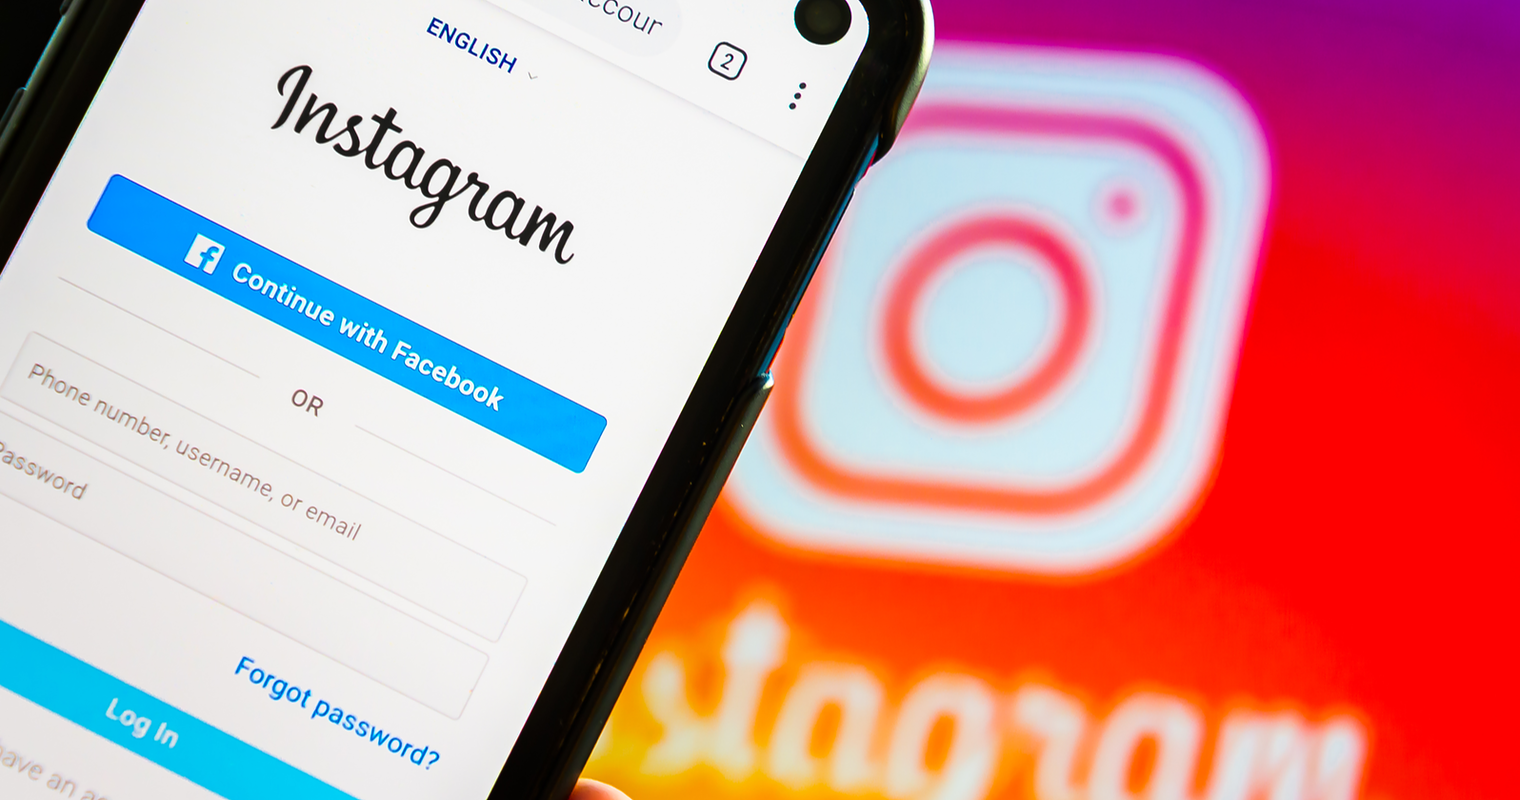 11 Tips to Increase Sales on Instagram